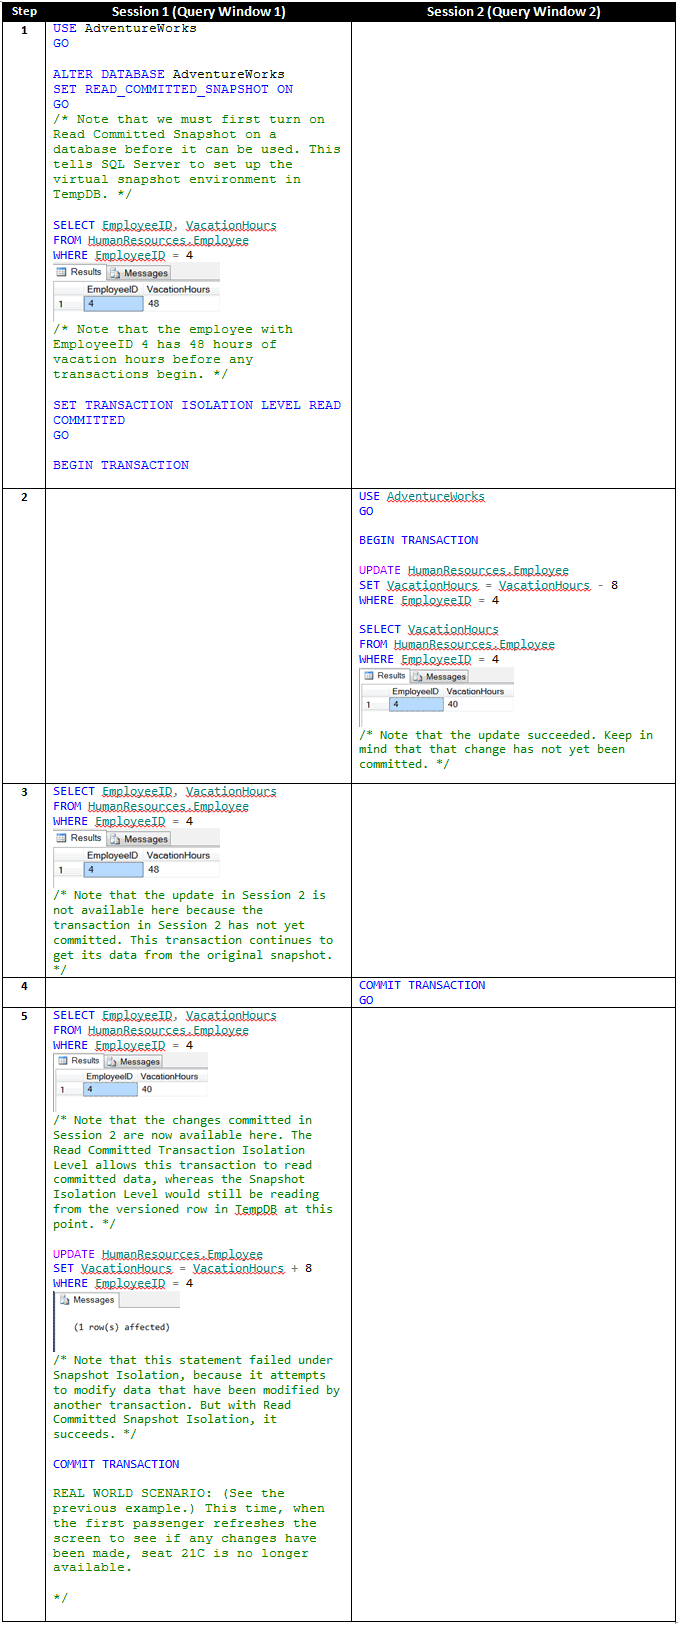 SQL 2008 2012 Read Committed Snapshot Isolation Level